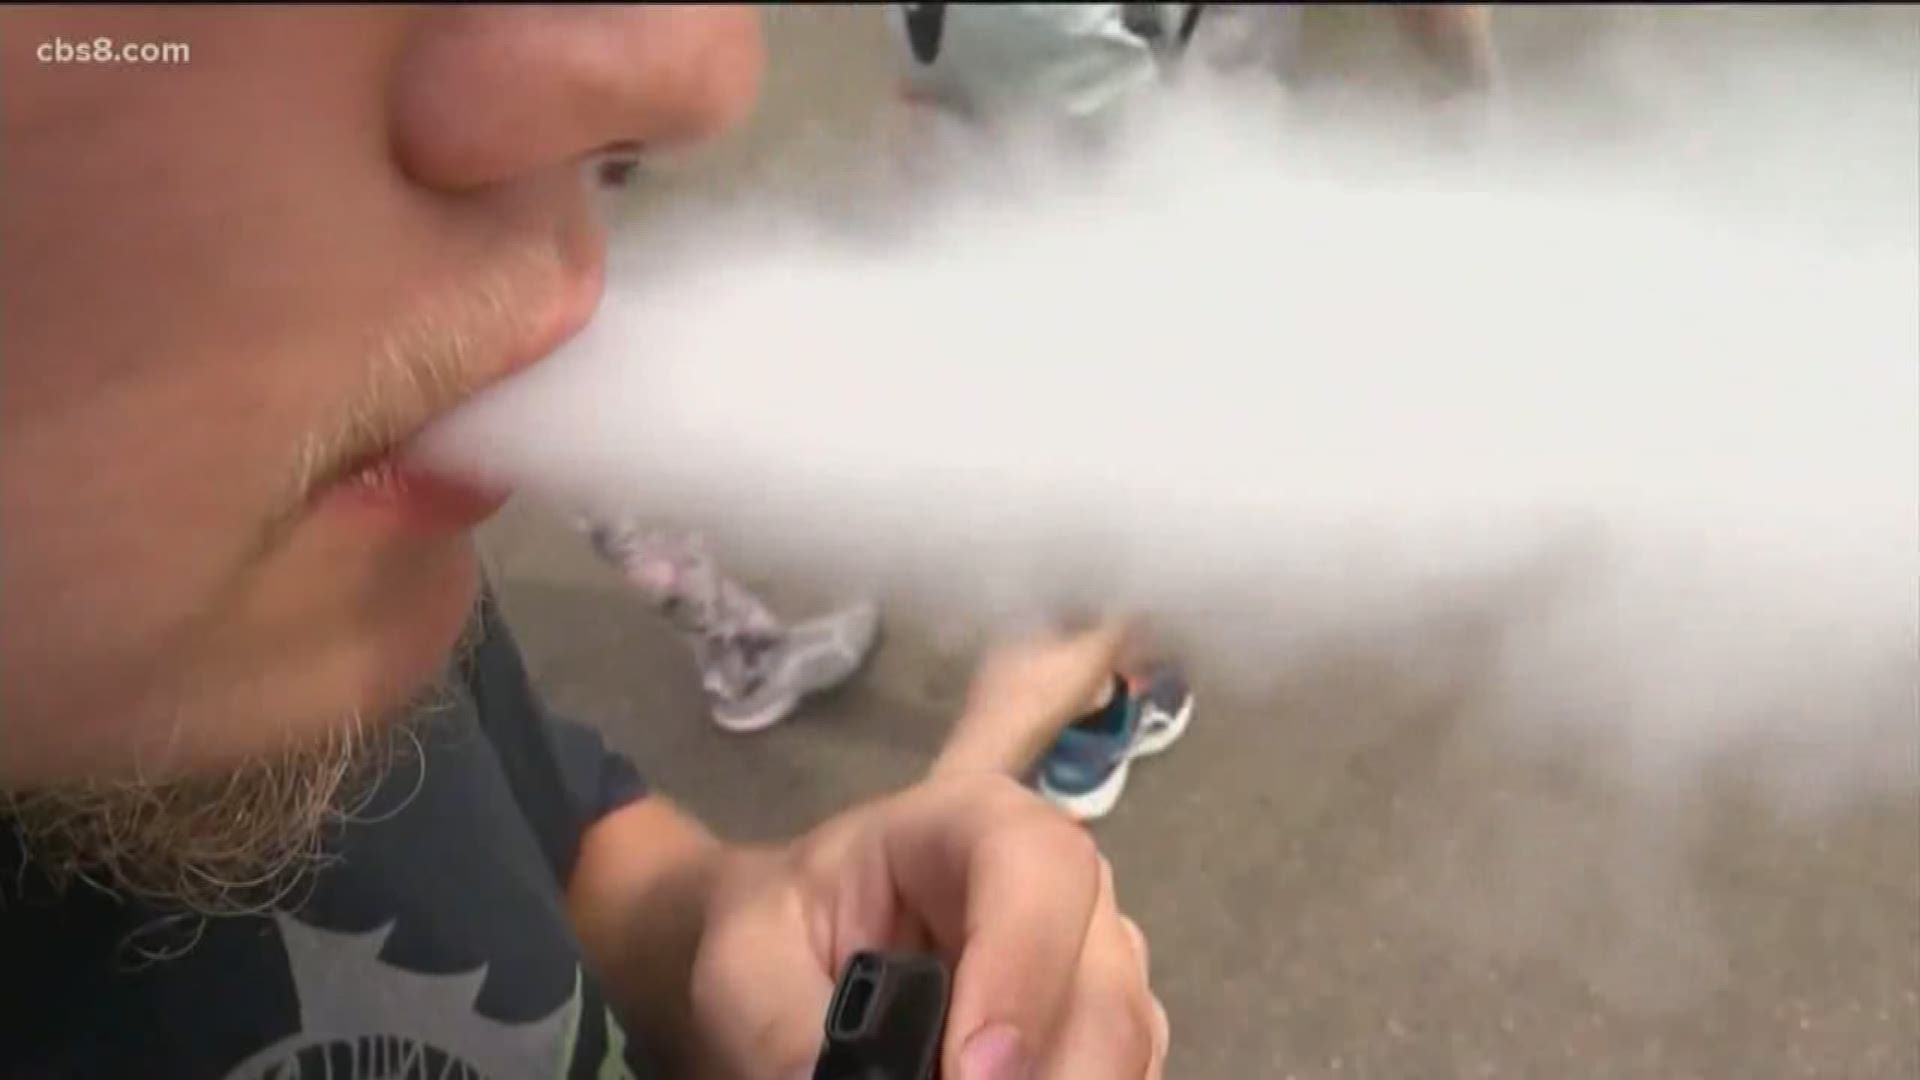 Some educators say this will help kids safe, while others argued it will just encourage kids to buy vaping products online.